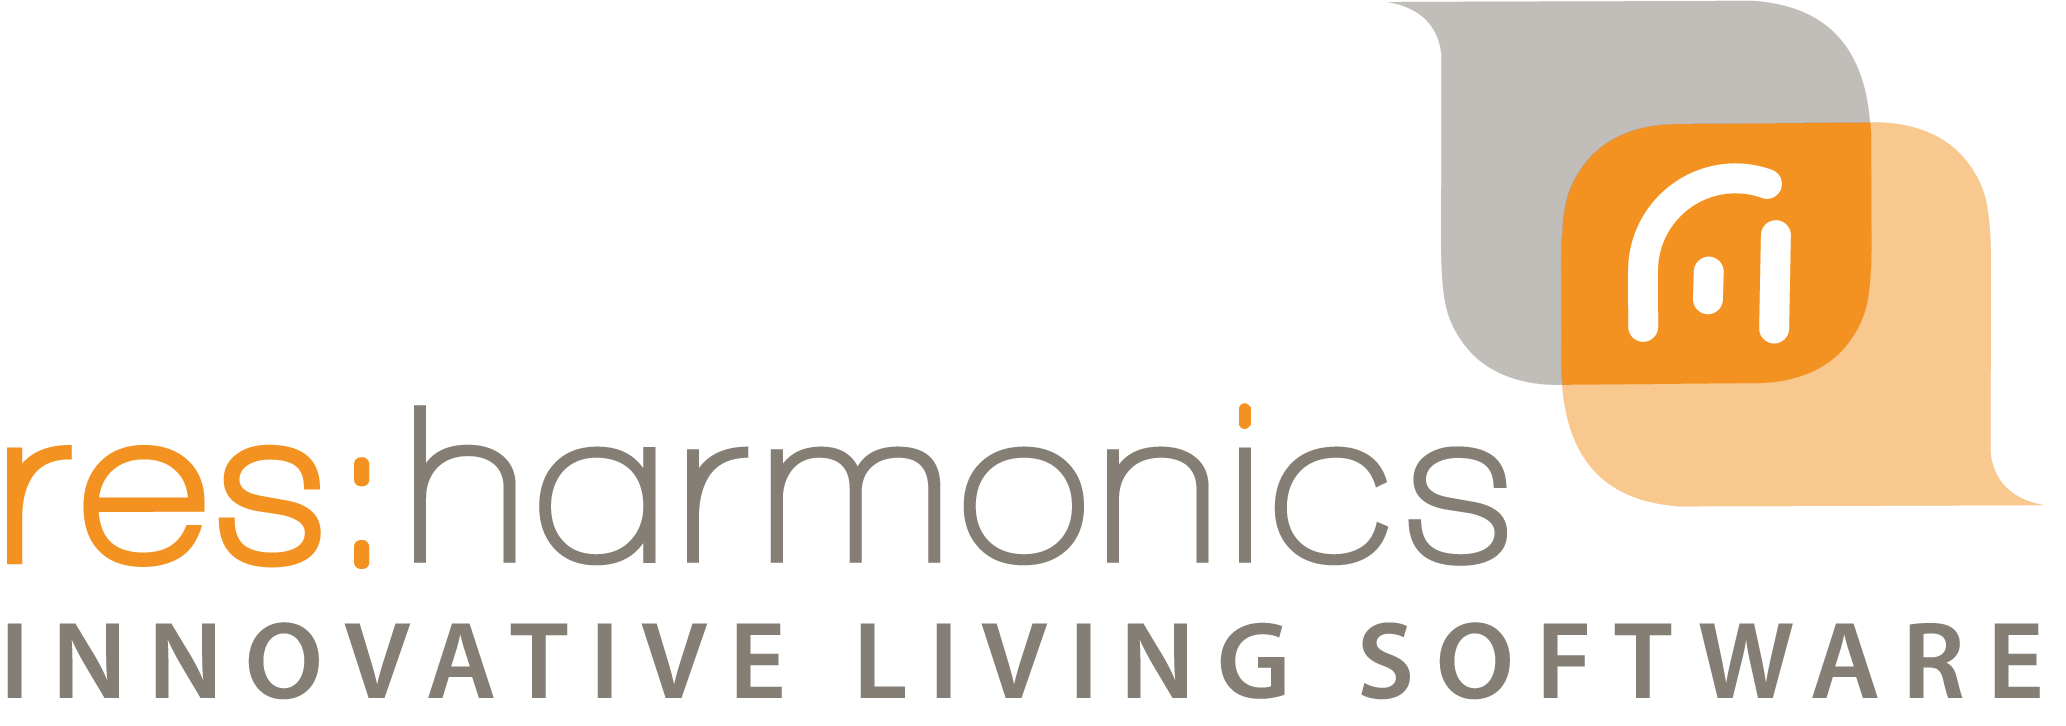 res:harmonics logo in orange, grey and white, towards the right hand corner, with the brand name in orange (res:) and grey (harmonics) and the words "Innovative living software" in grey and capitals underneath